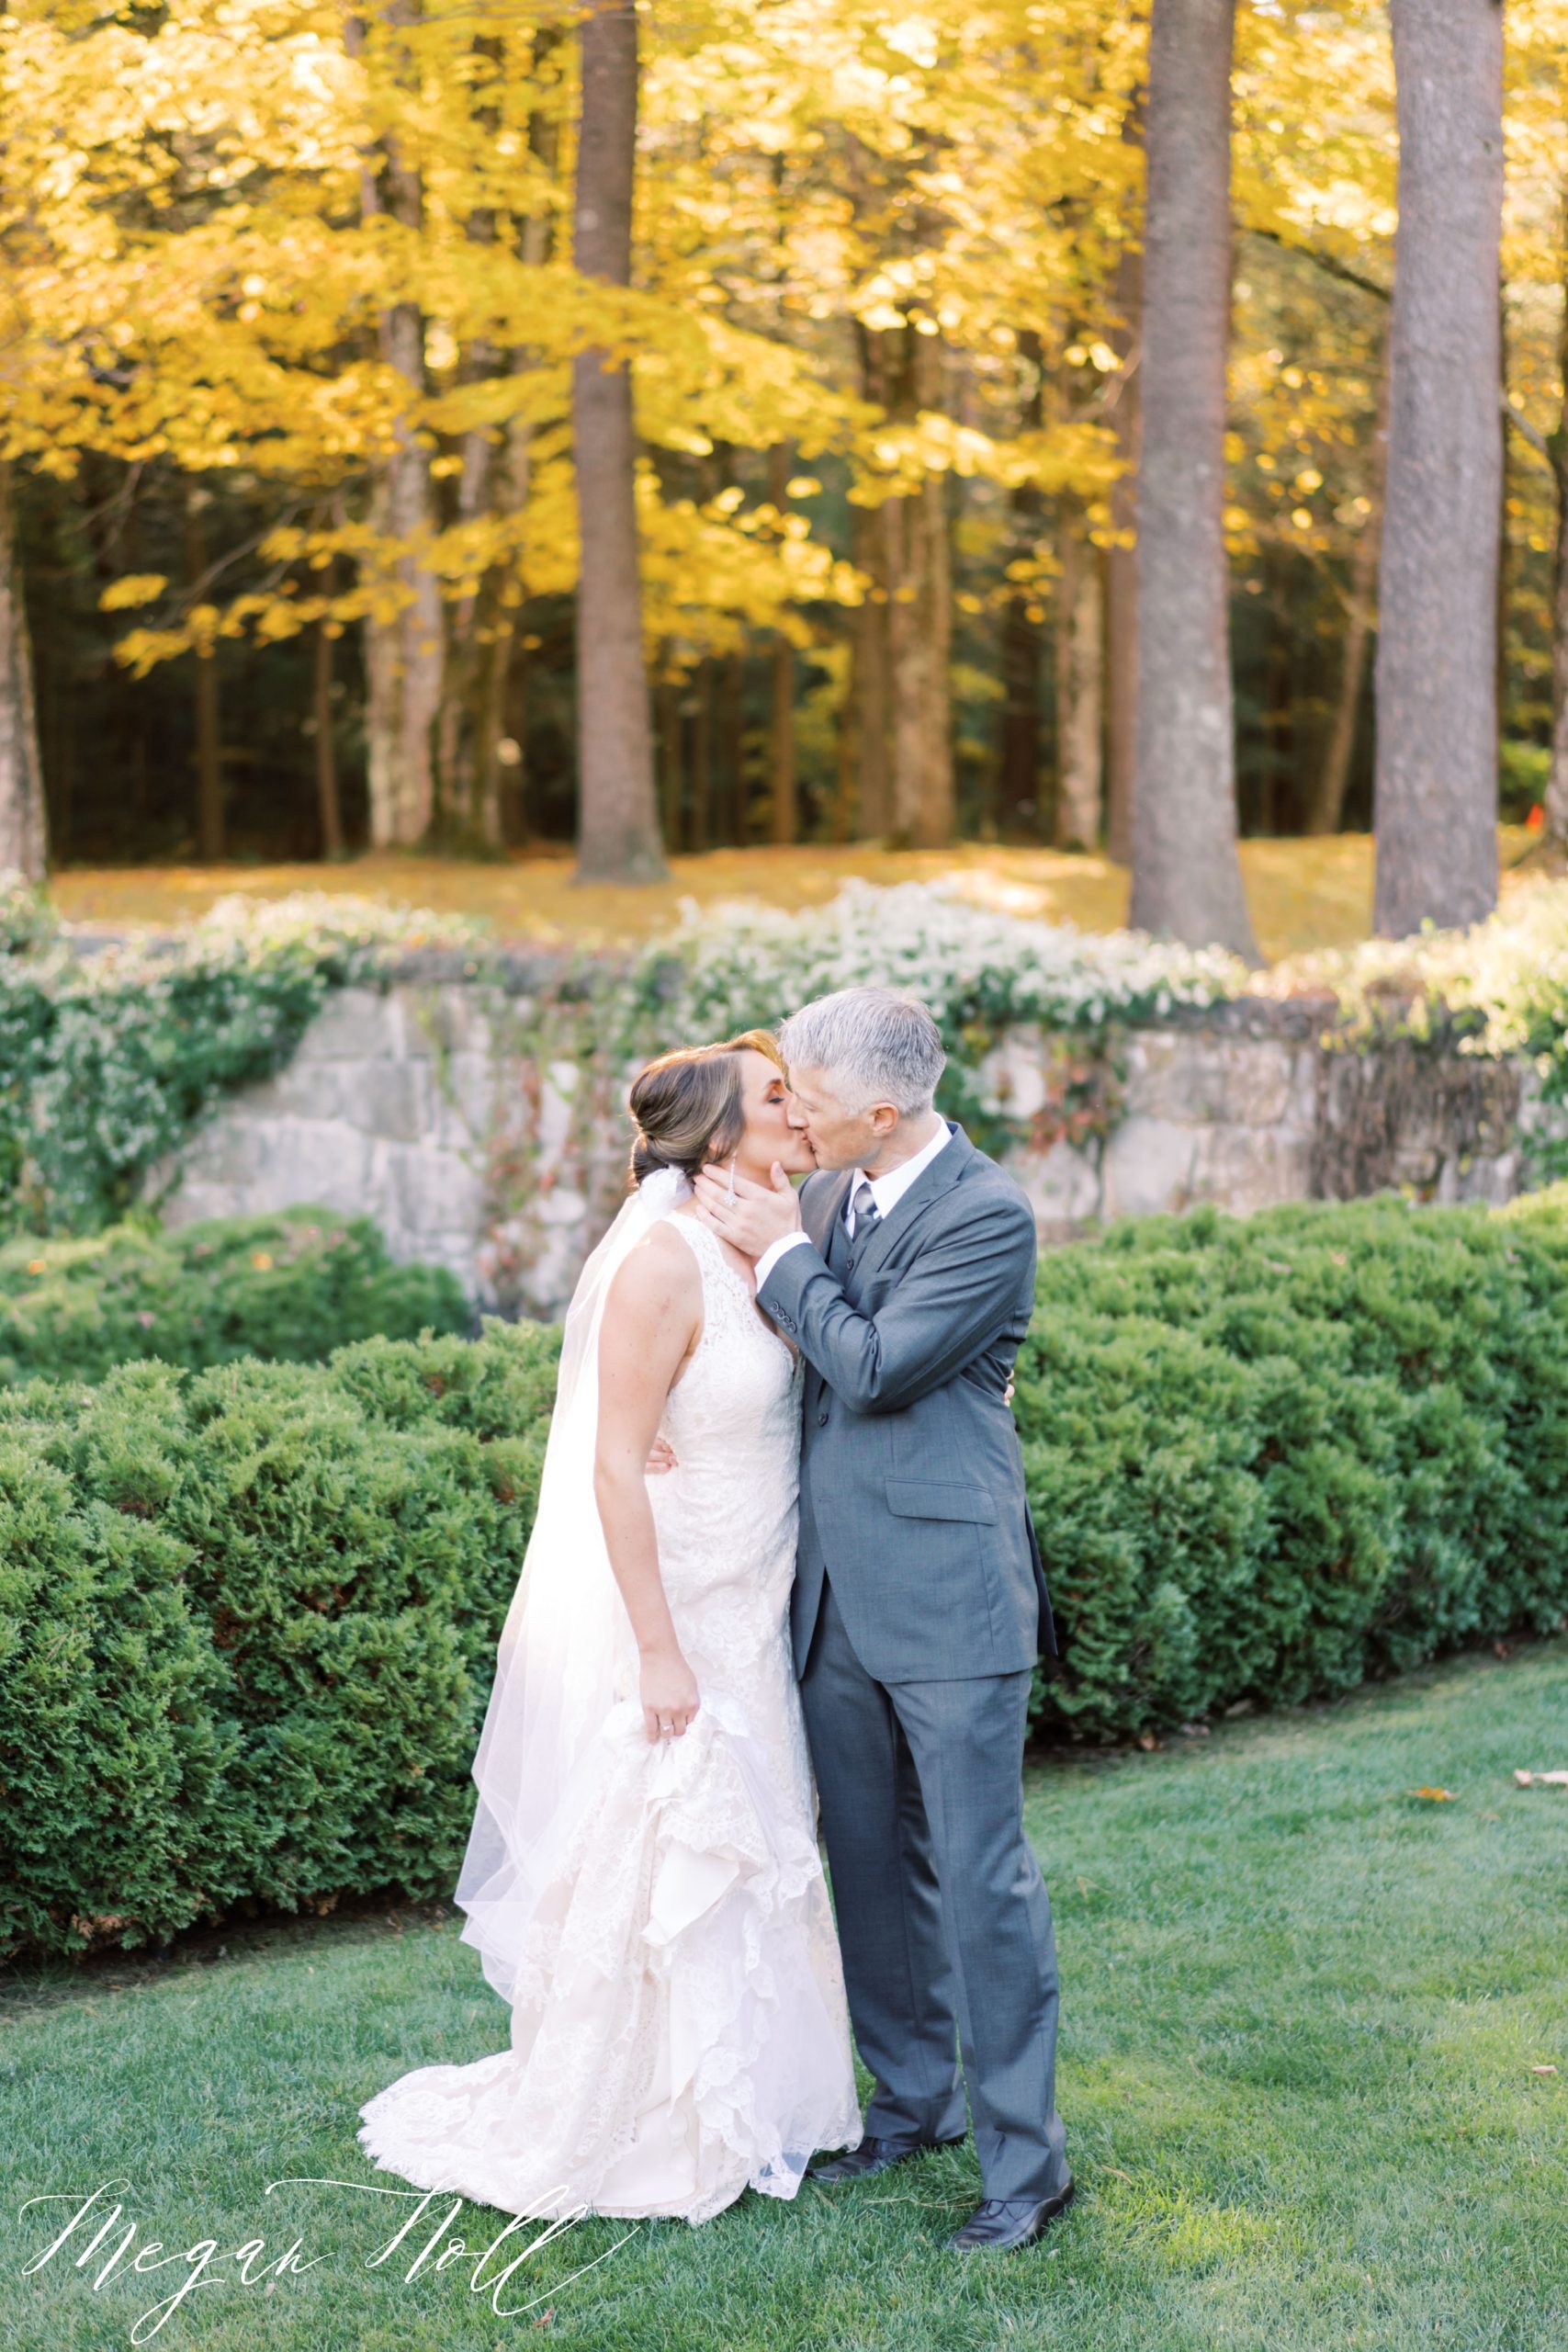 Fall Wedding at The Mount, Edith Whartons Home in Lenox